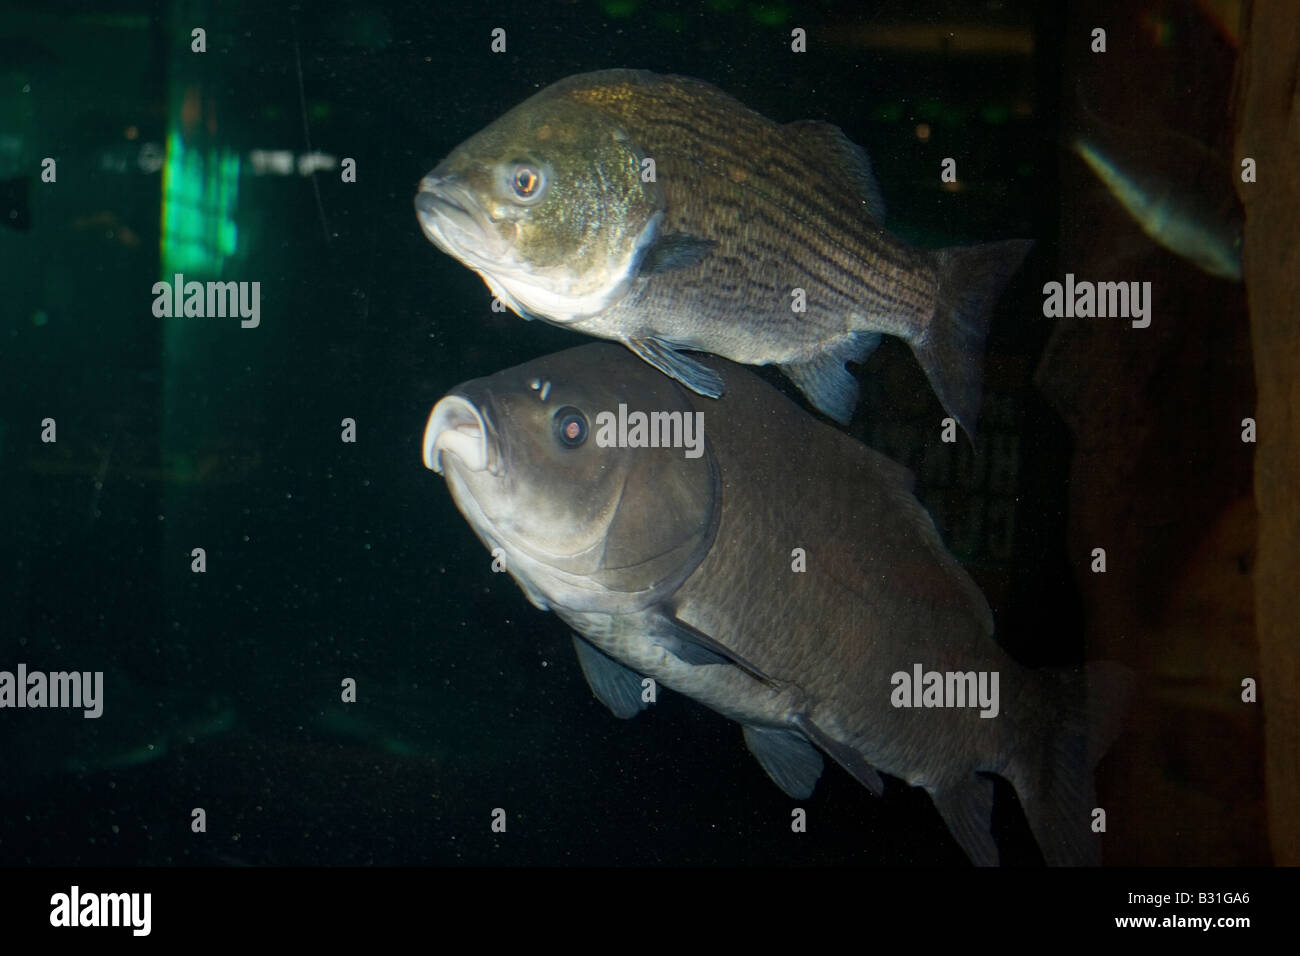 Fish, Crappie and unknown, in fresh water tank Stock Photo